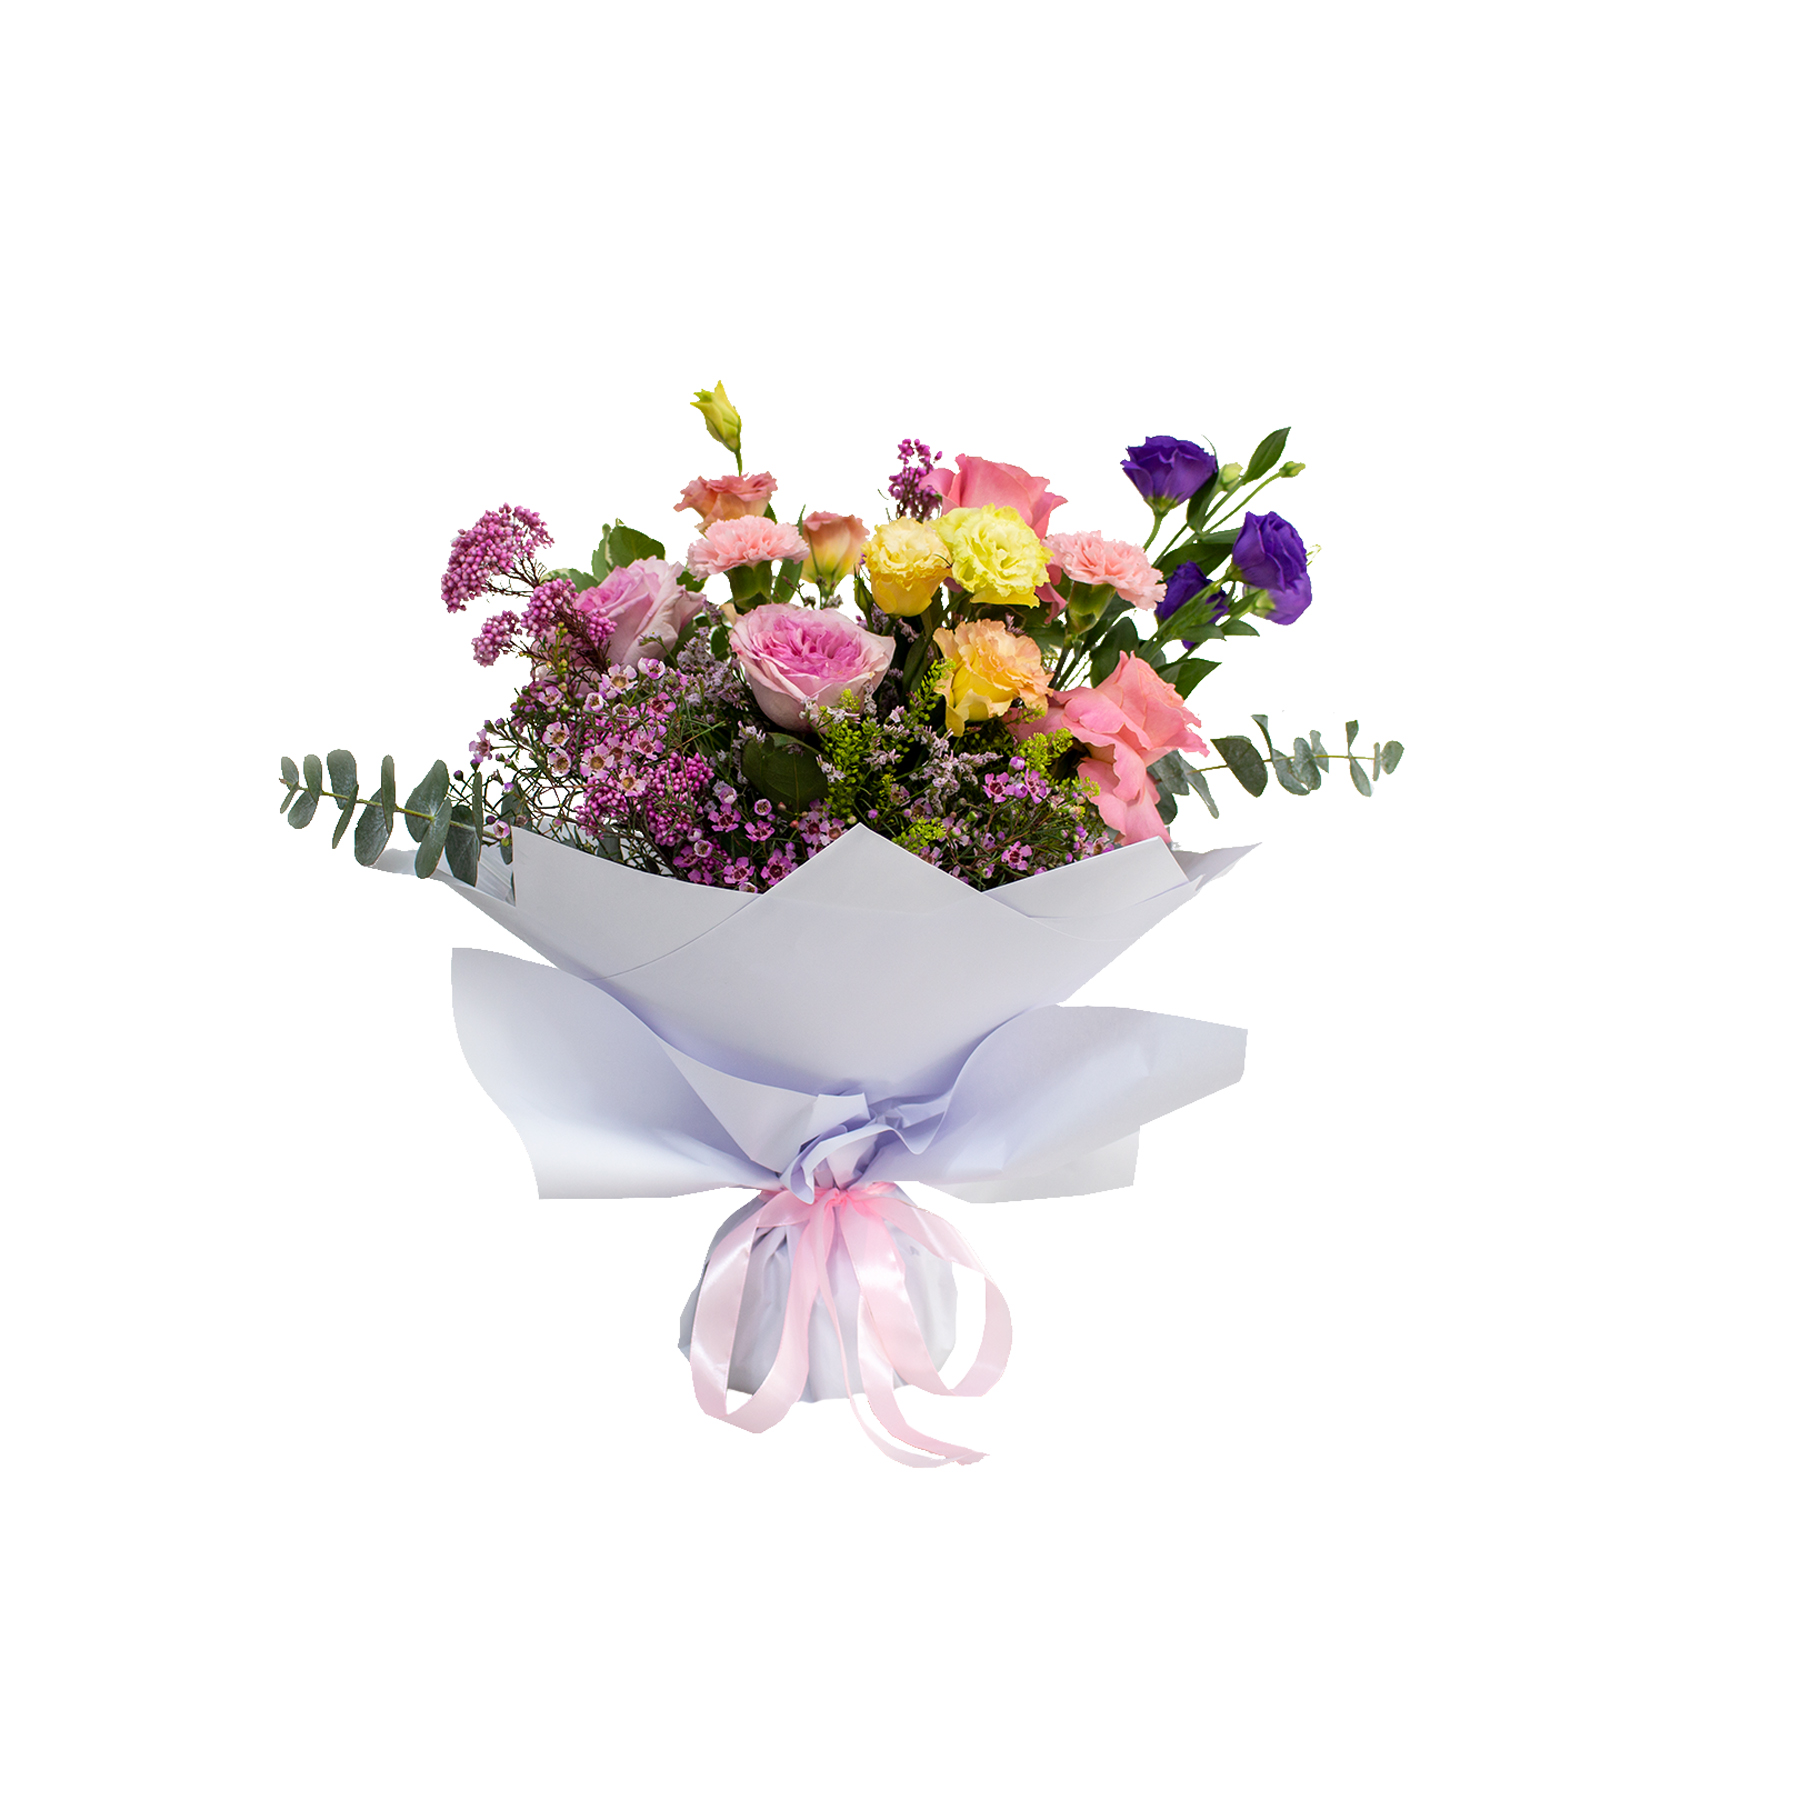 pink ,purple and orange flowers with pink wax1